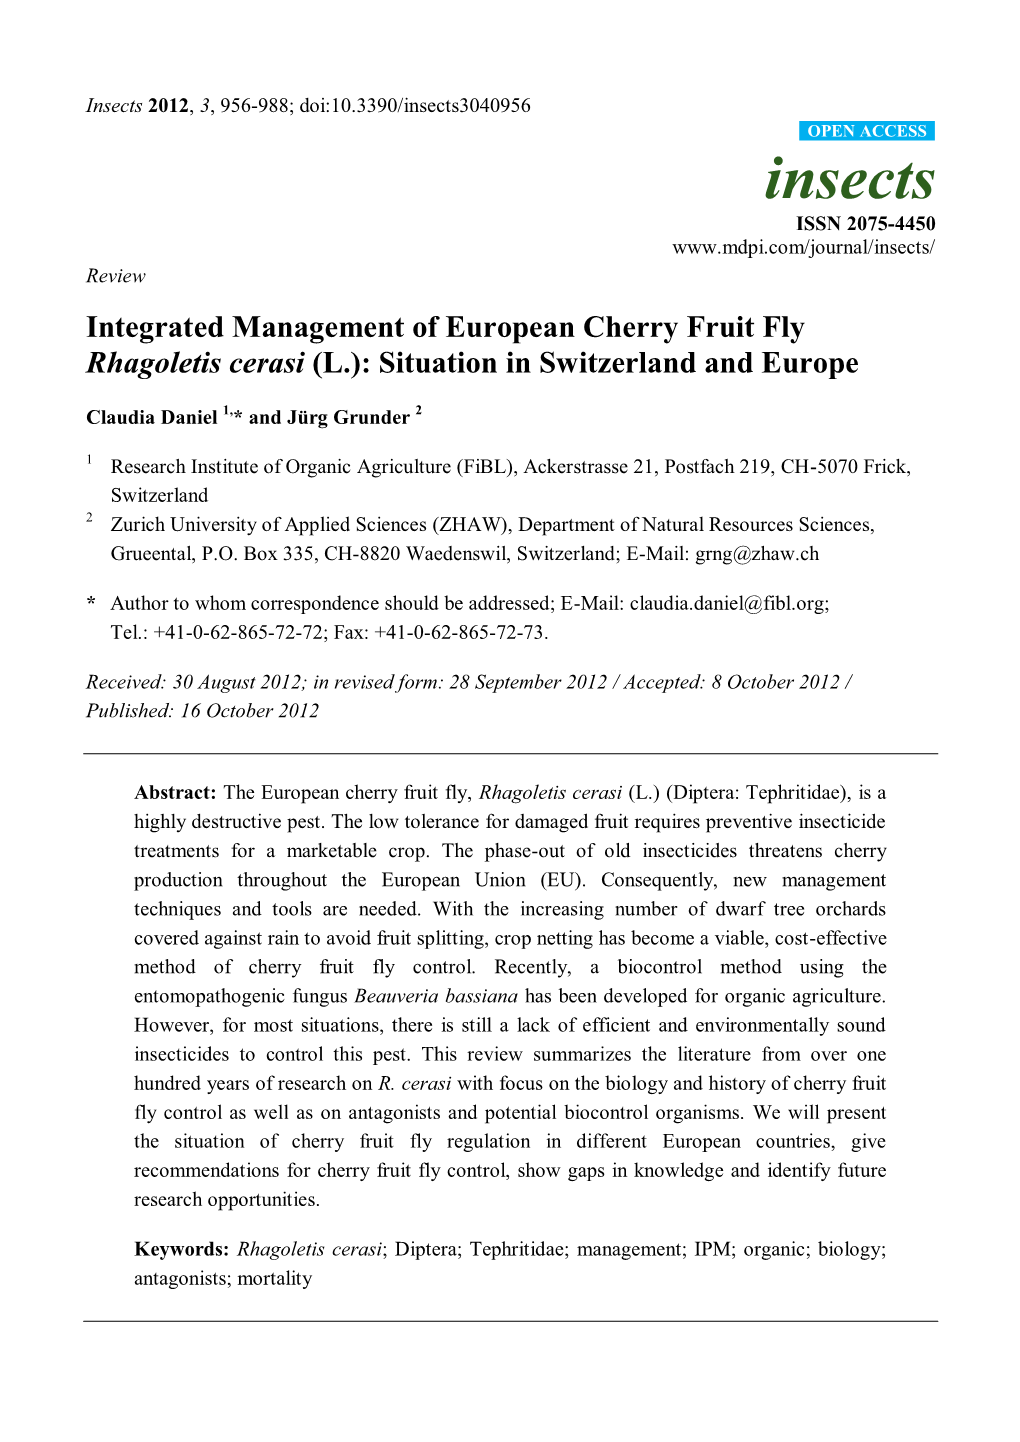 Integrated Management of European Cherry Fruit Fly Rhagoletis Cerasi (L.): Situation in Switzerland and Europe